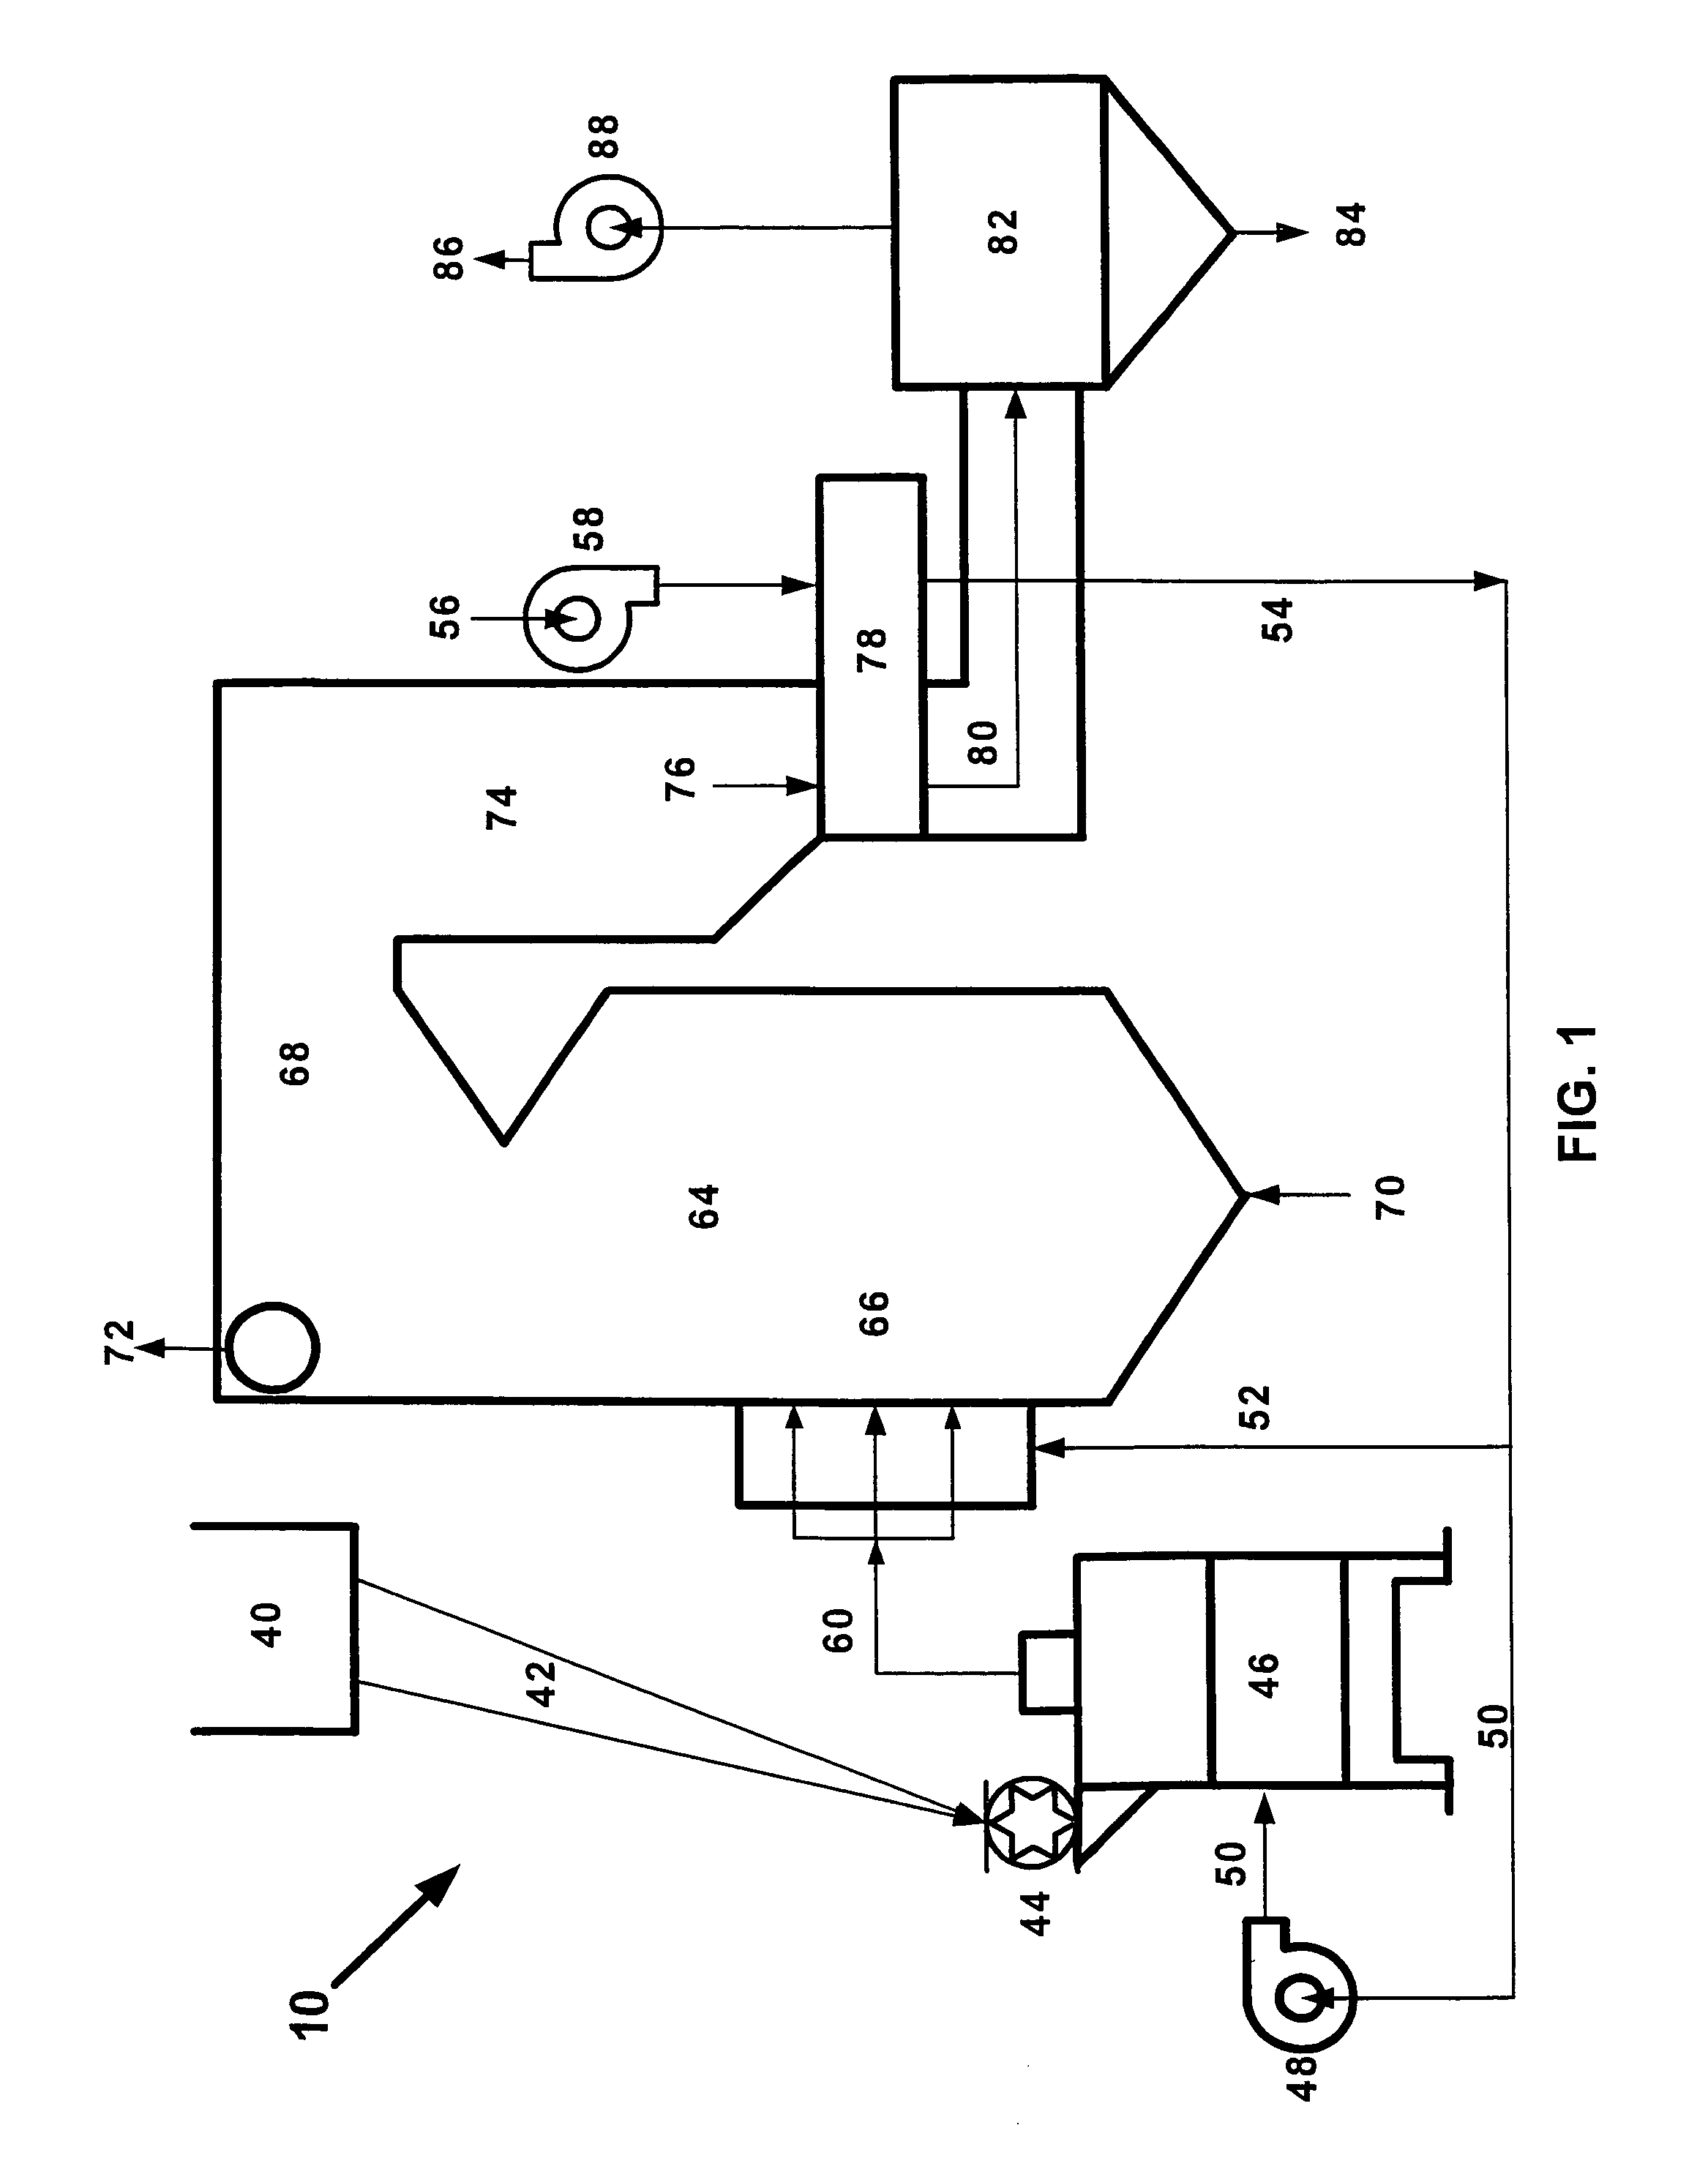 Coal treatment process for a coal-fired power plant